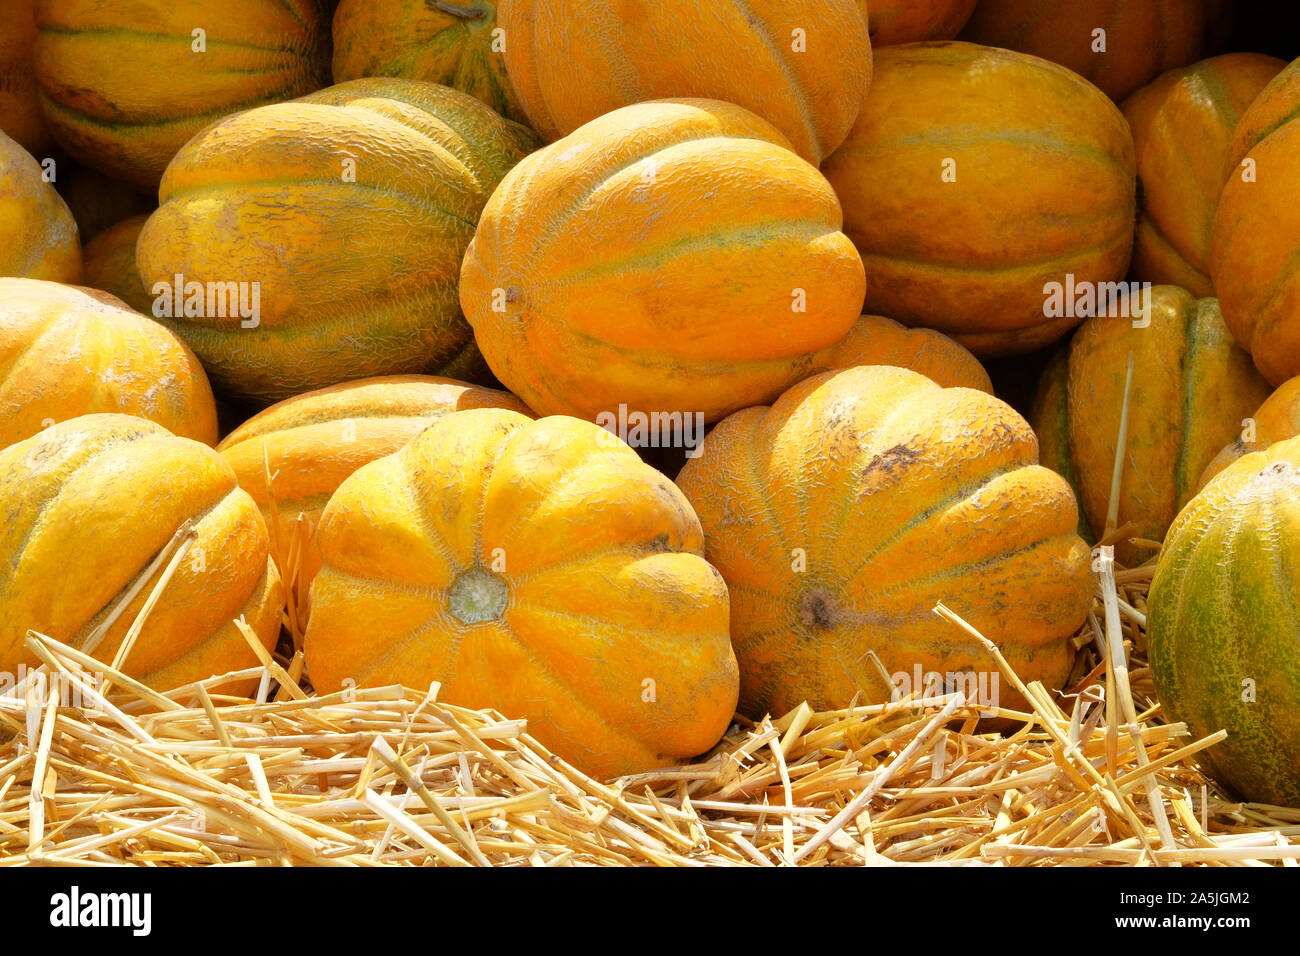 Melons are sold at local farmers market after harvest. Healthy eating and vitamins. Autumn harvest, juicy and ripe yellow melons. Close up. Stock Photo